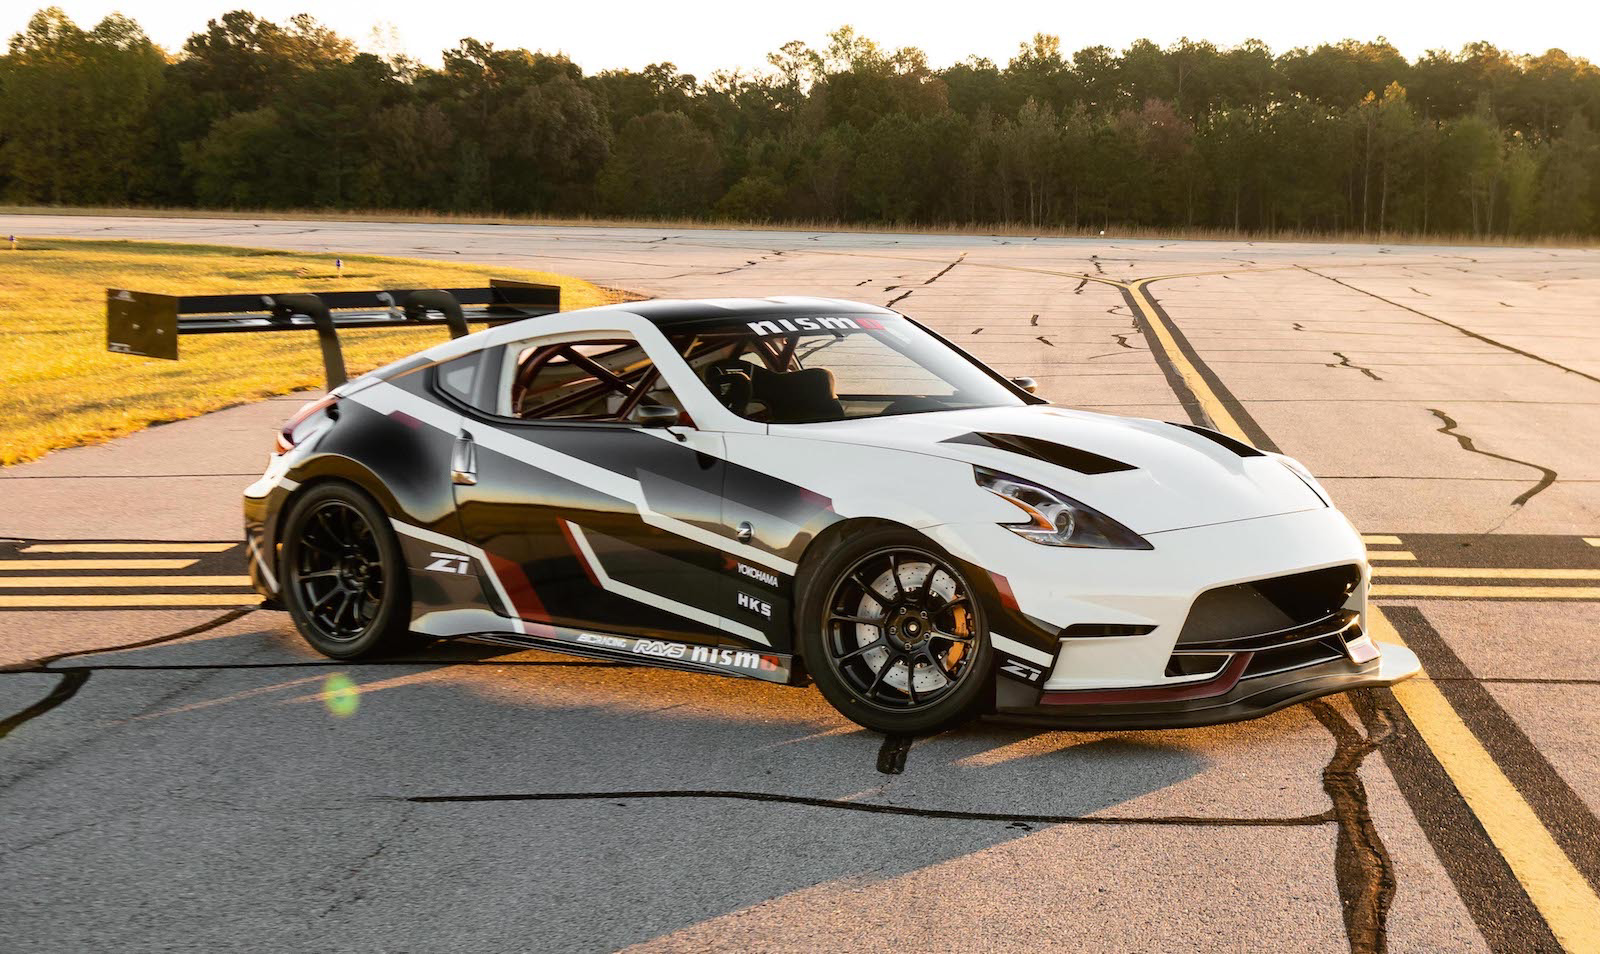 Nissan shows off cool racer concepts at SEMA